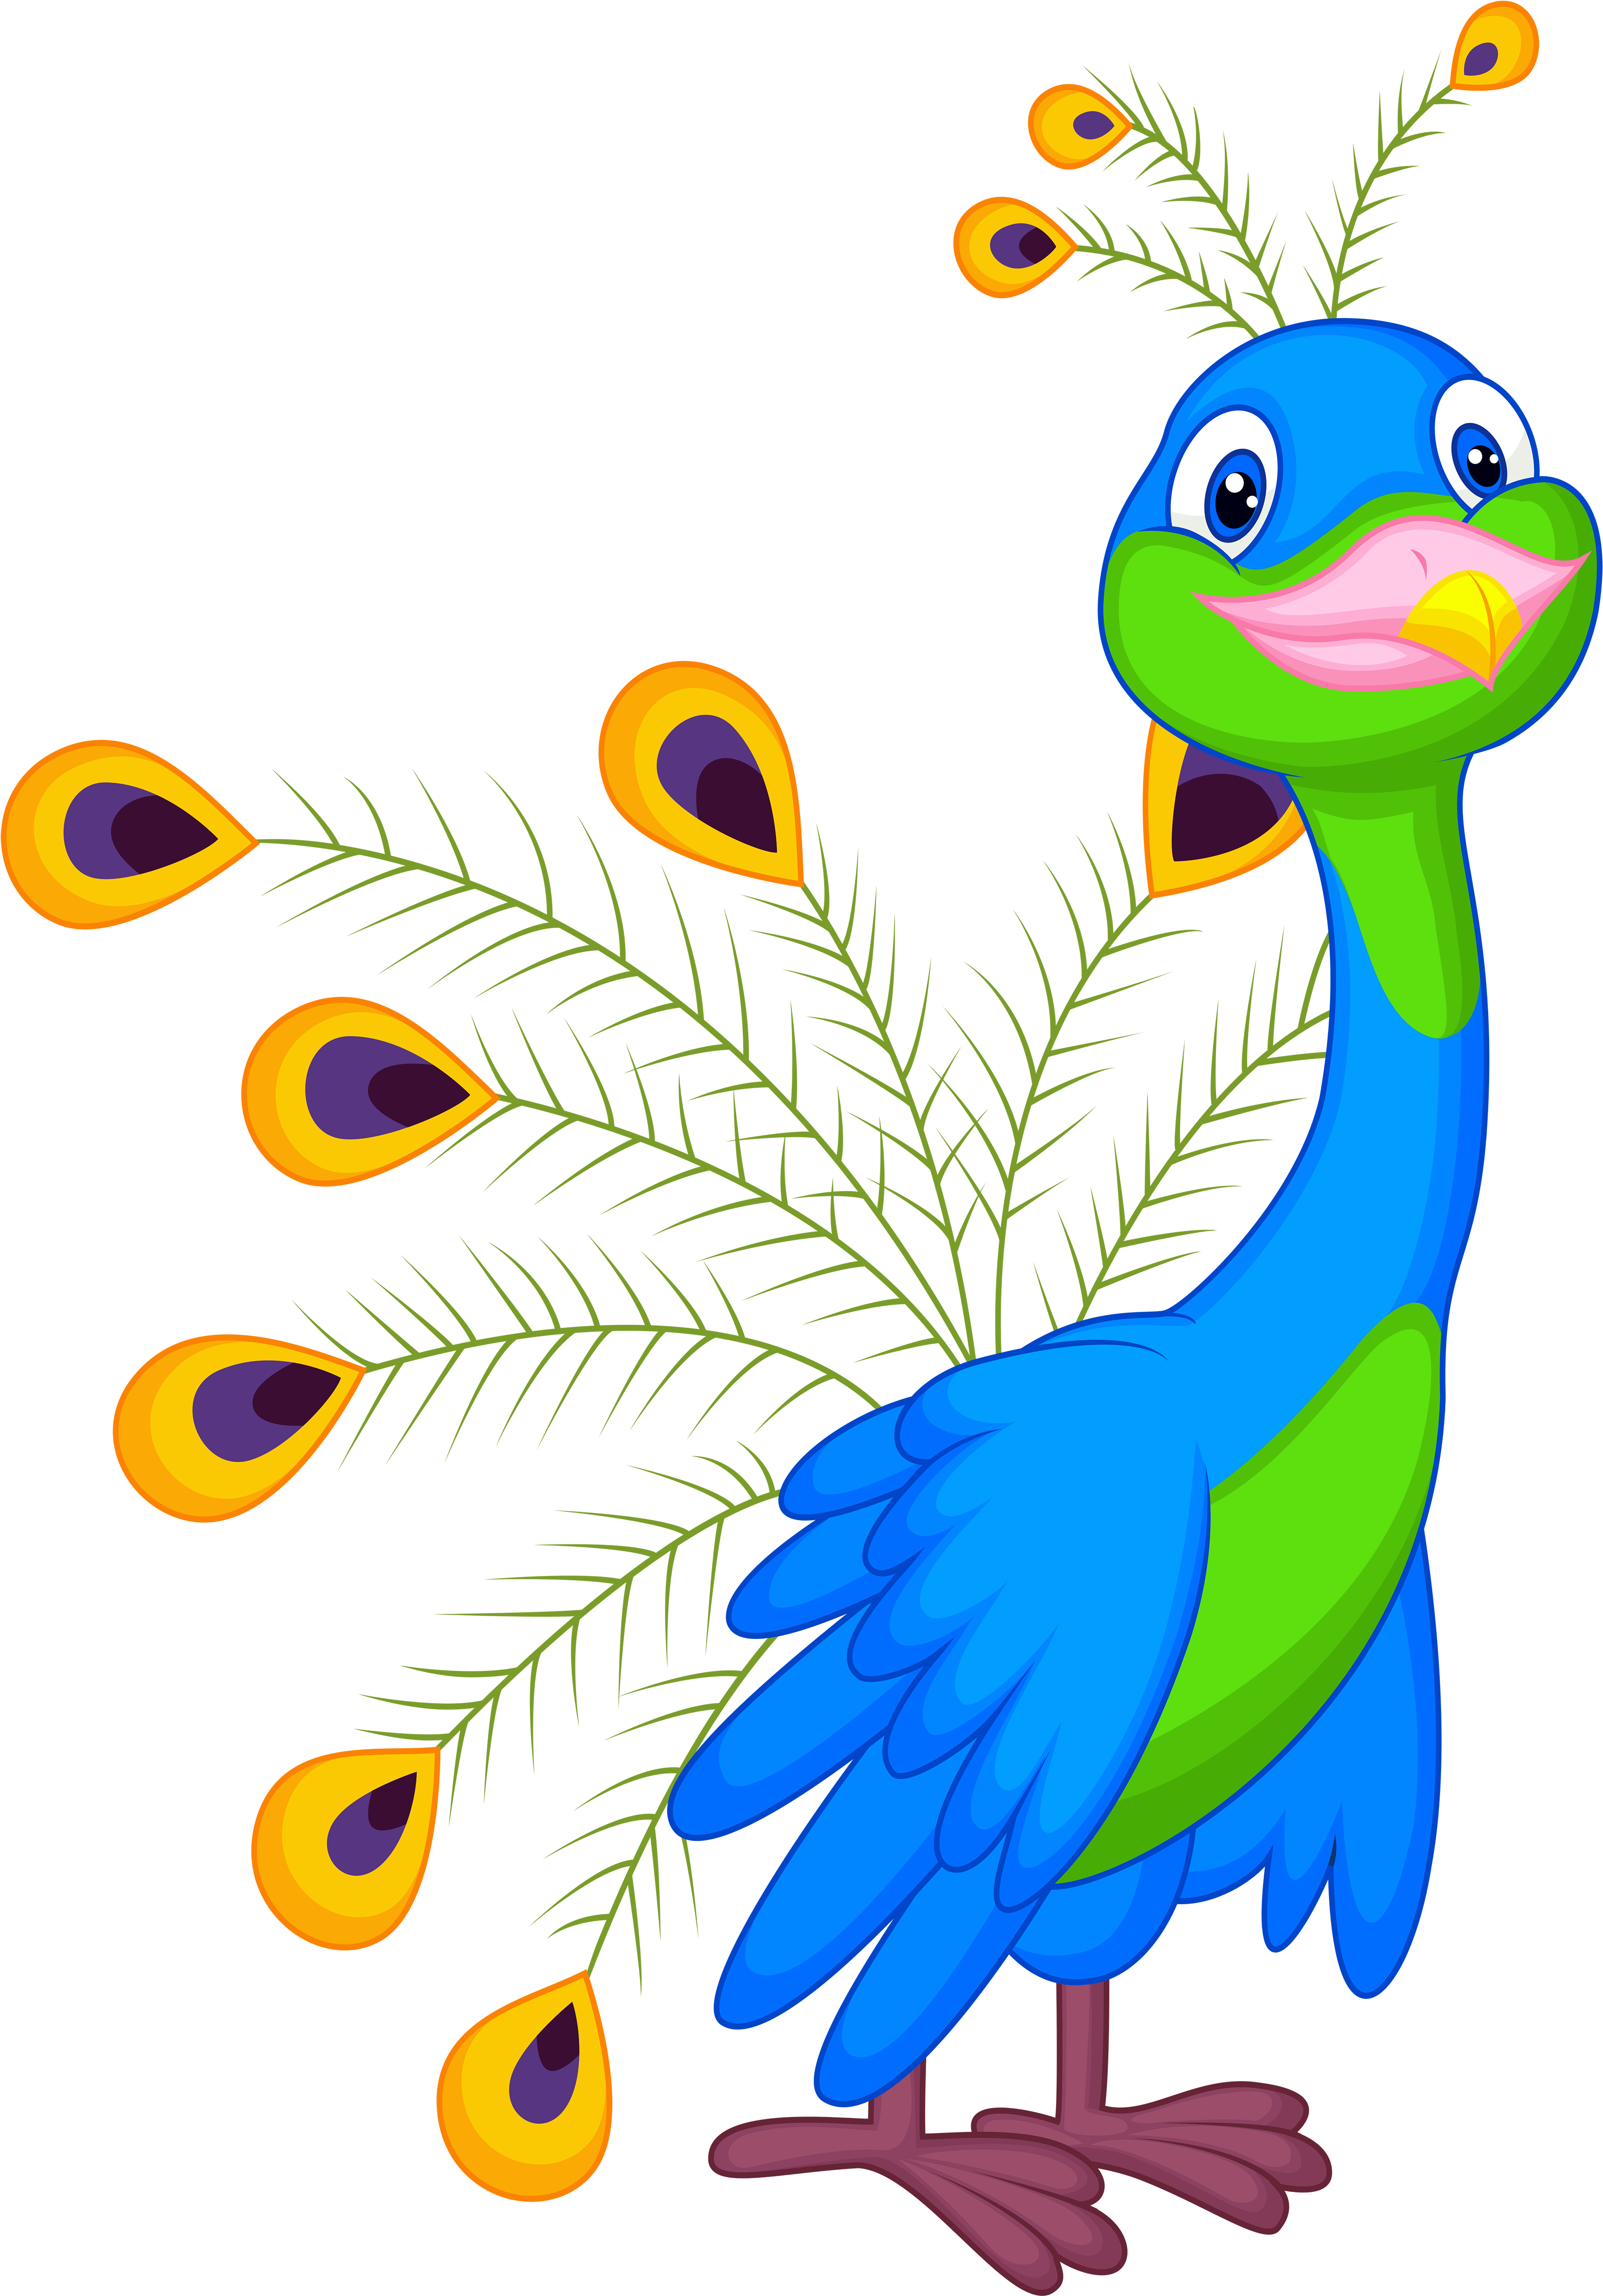 Colorful Cartoon Peacock PNG image